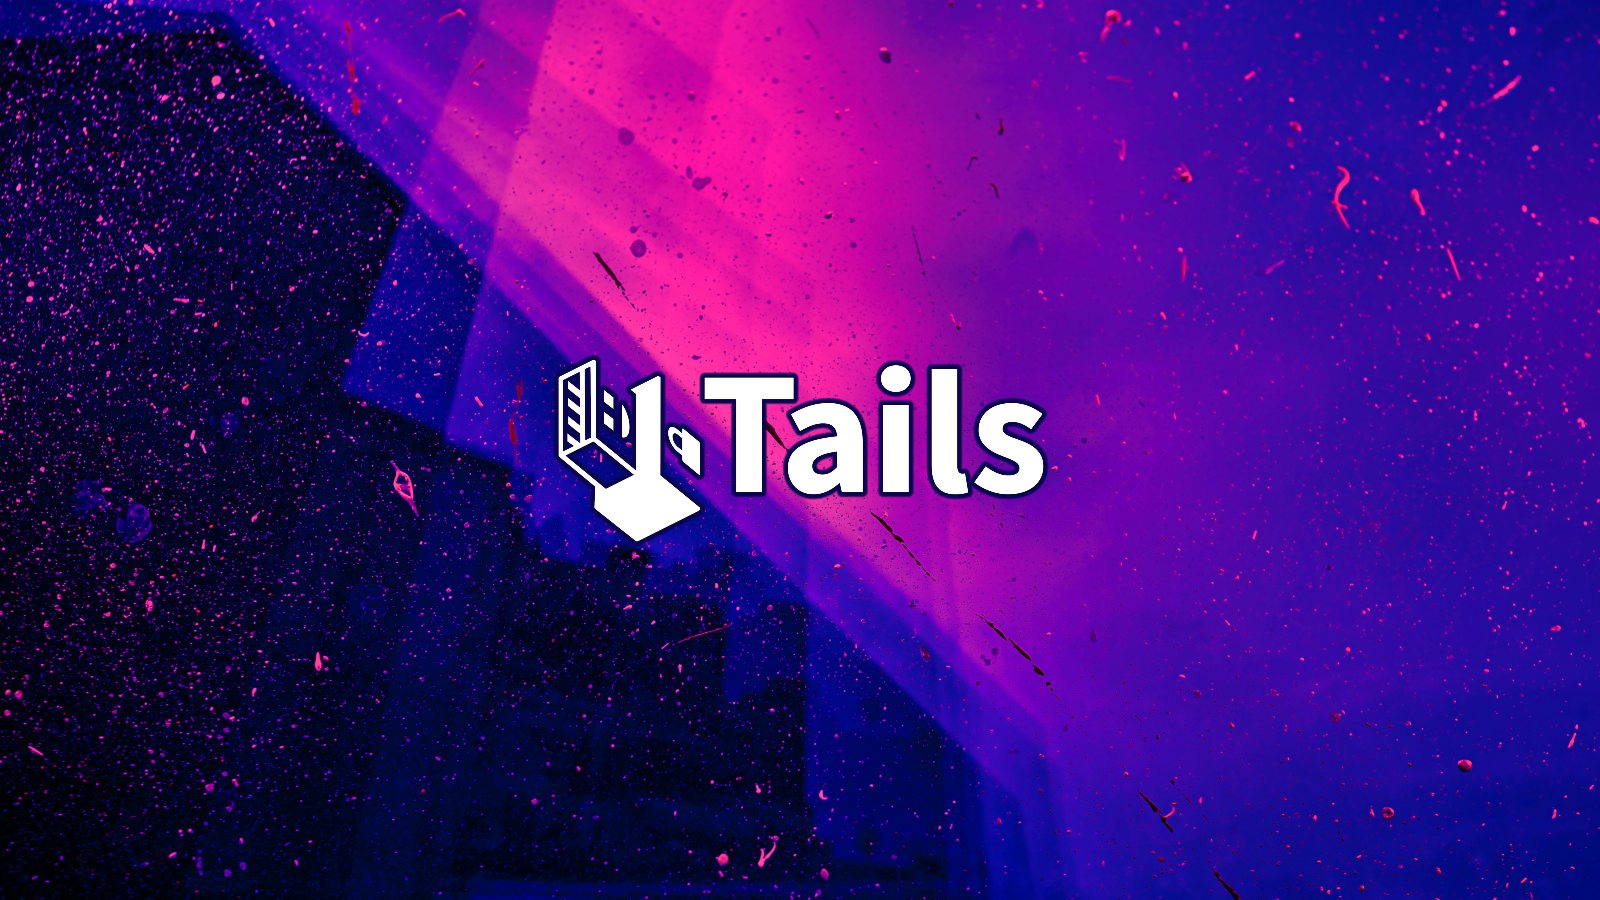 Tails 5.0 Linux users warned against using it “for sensitive information”